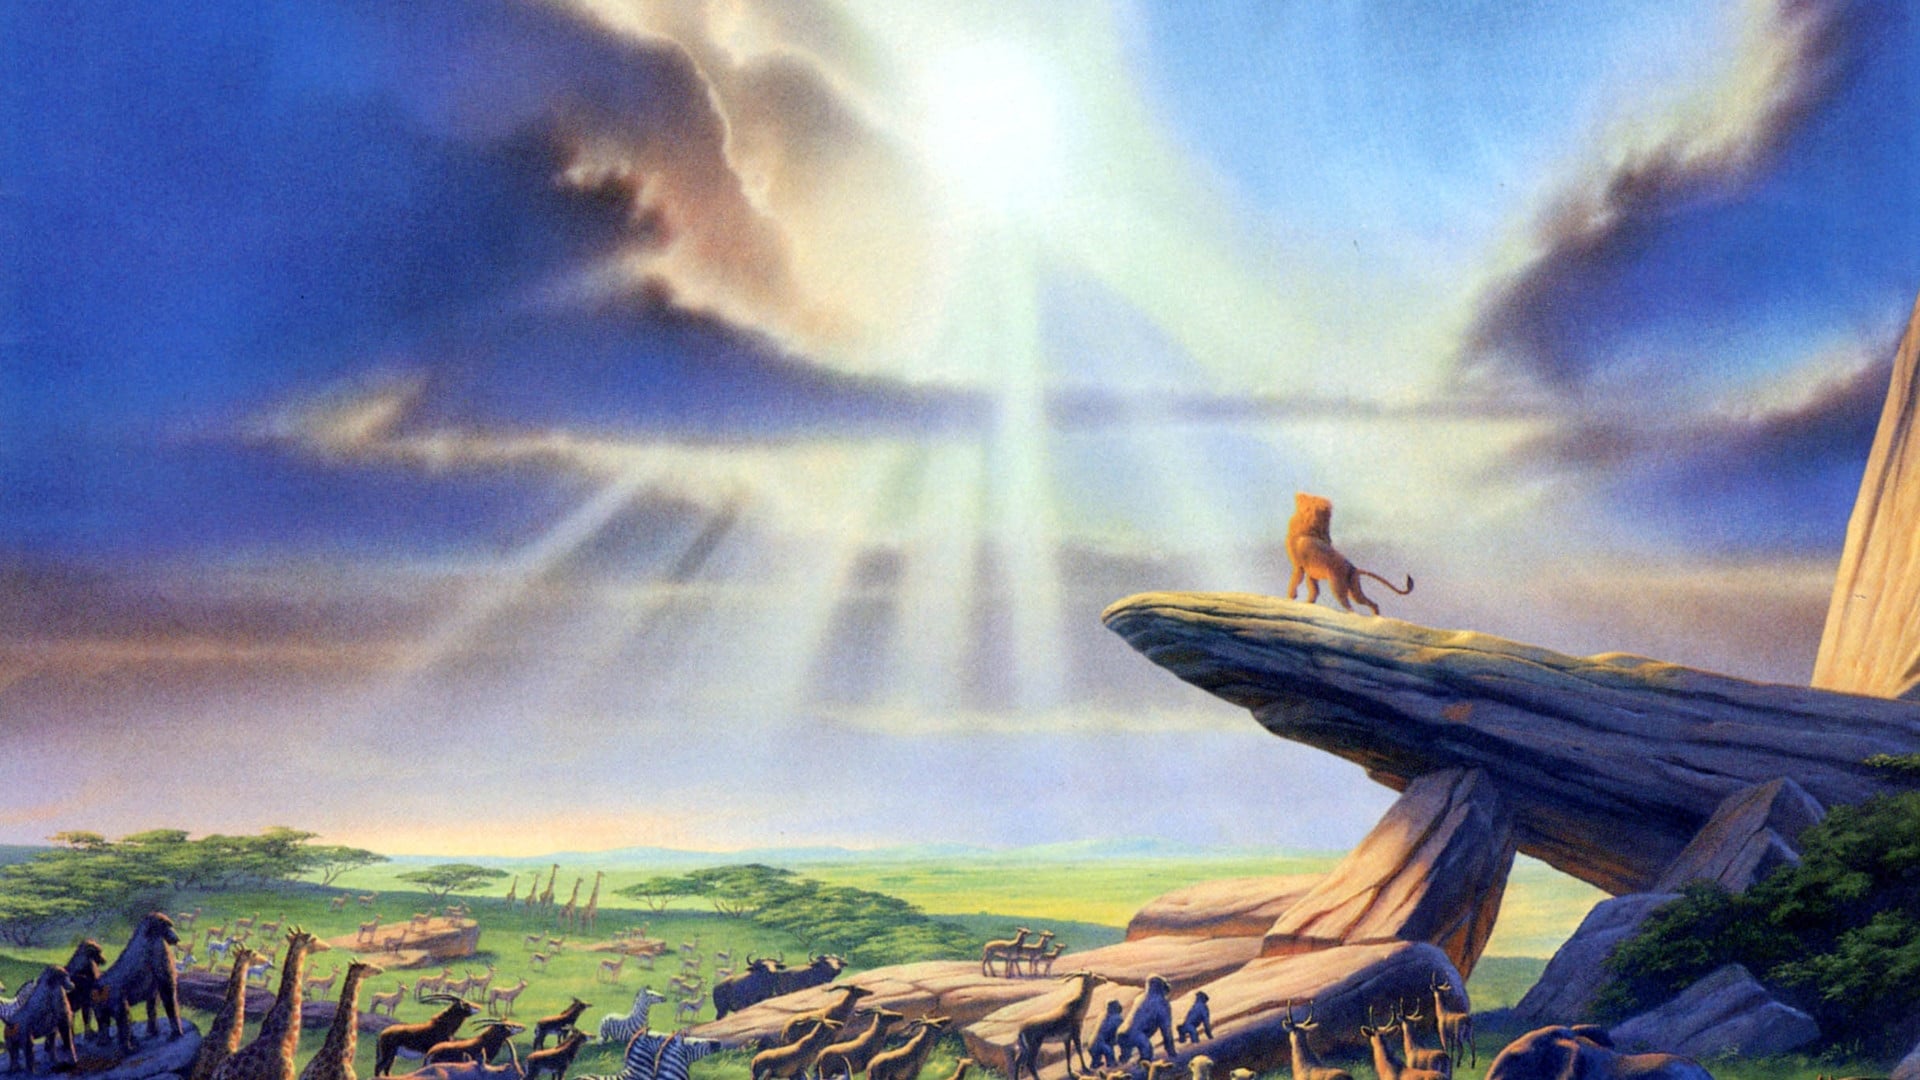 The Lion King 1994 Soap2Day